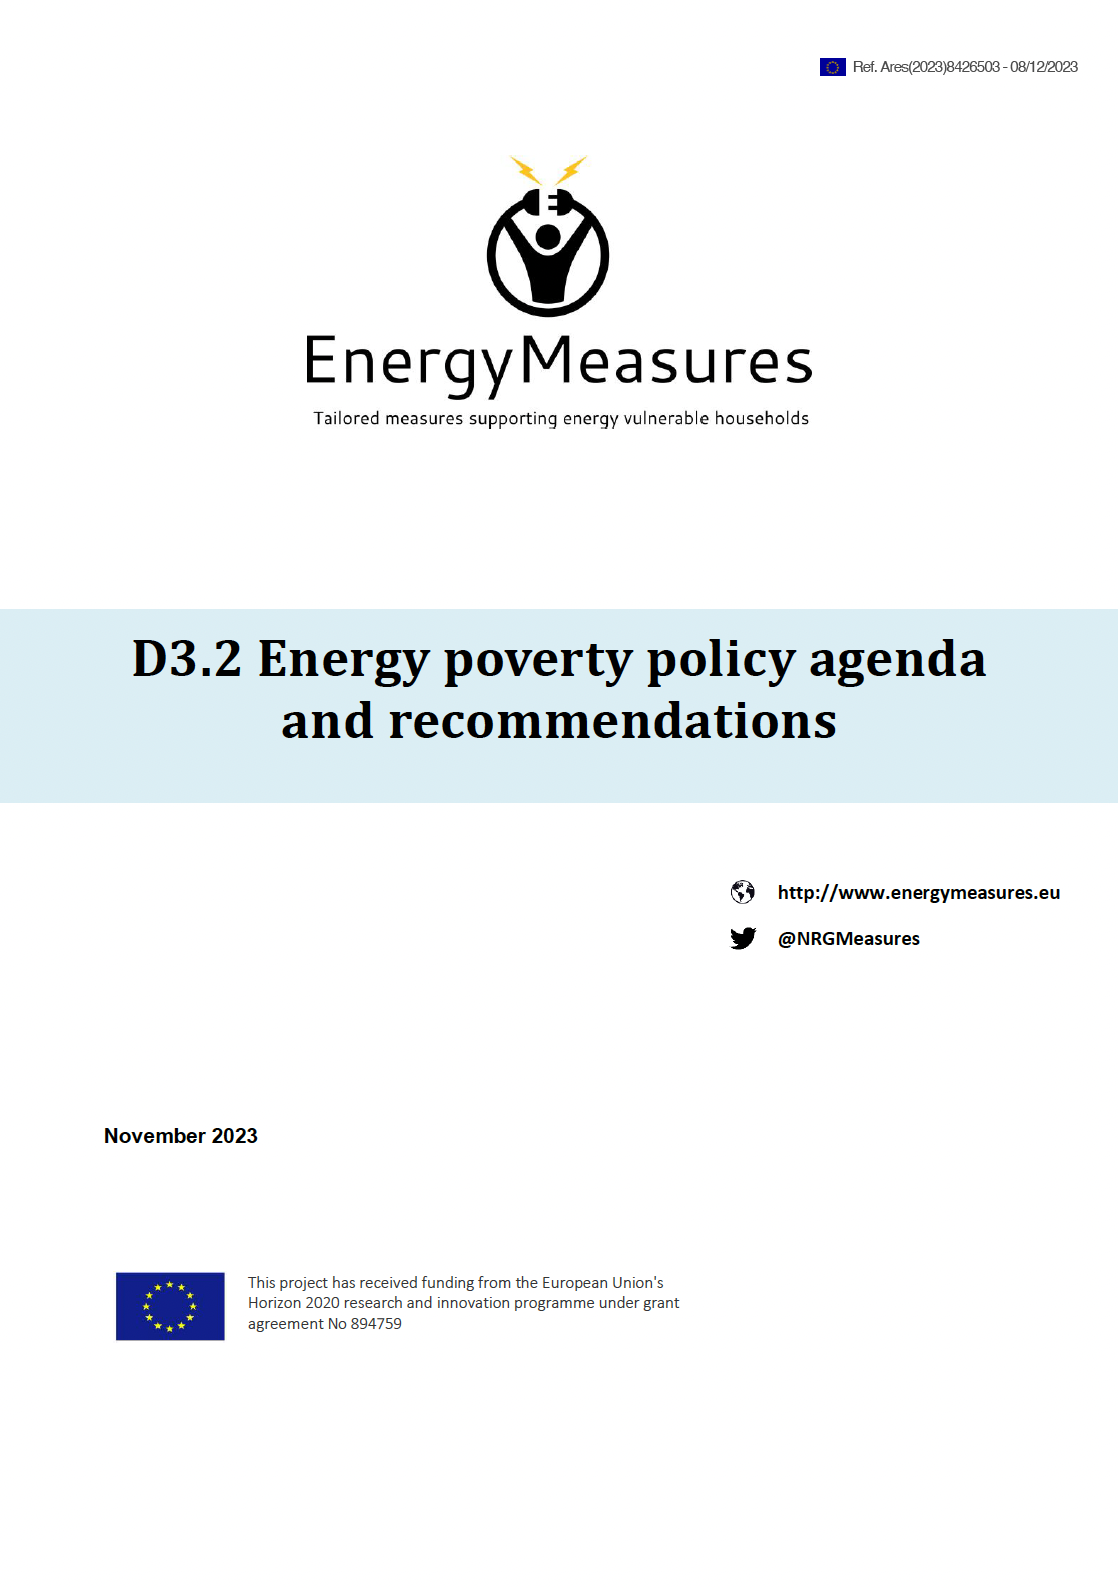 D3.2 Energy poverty policy agenda and recommendations